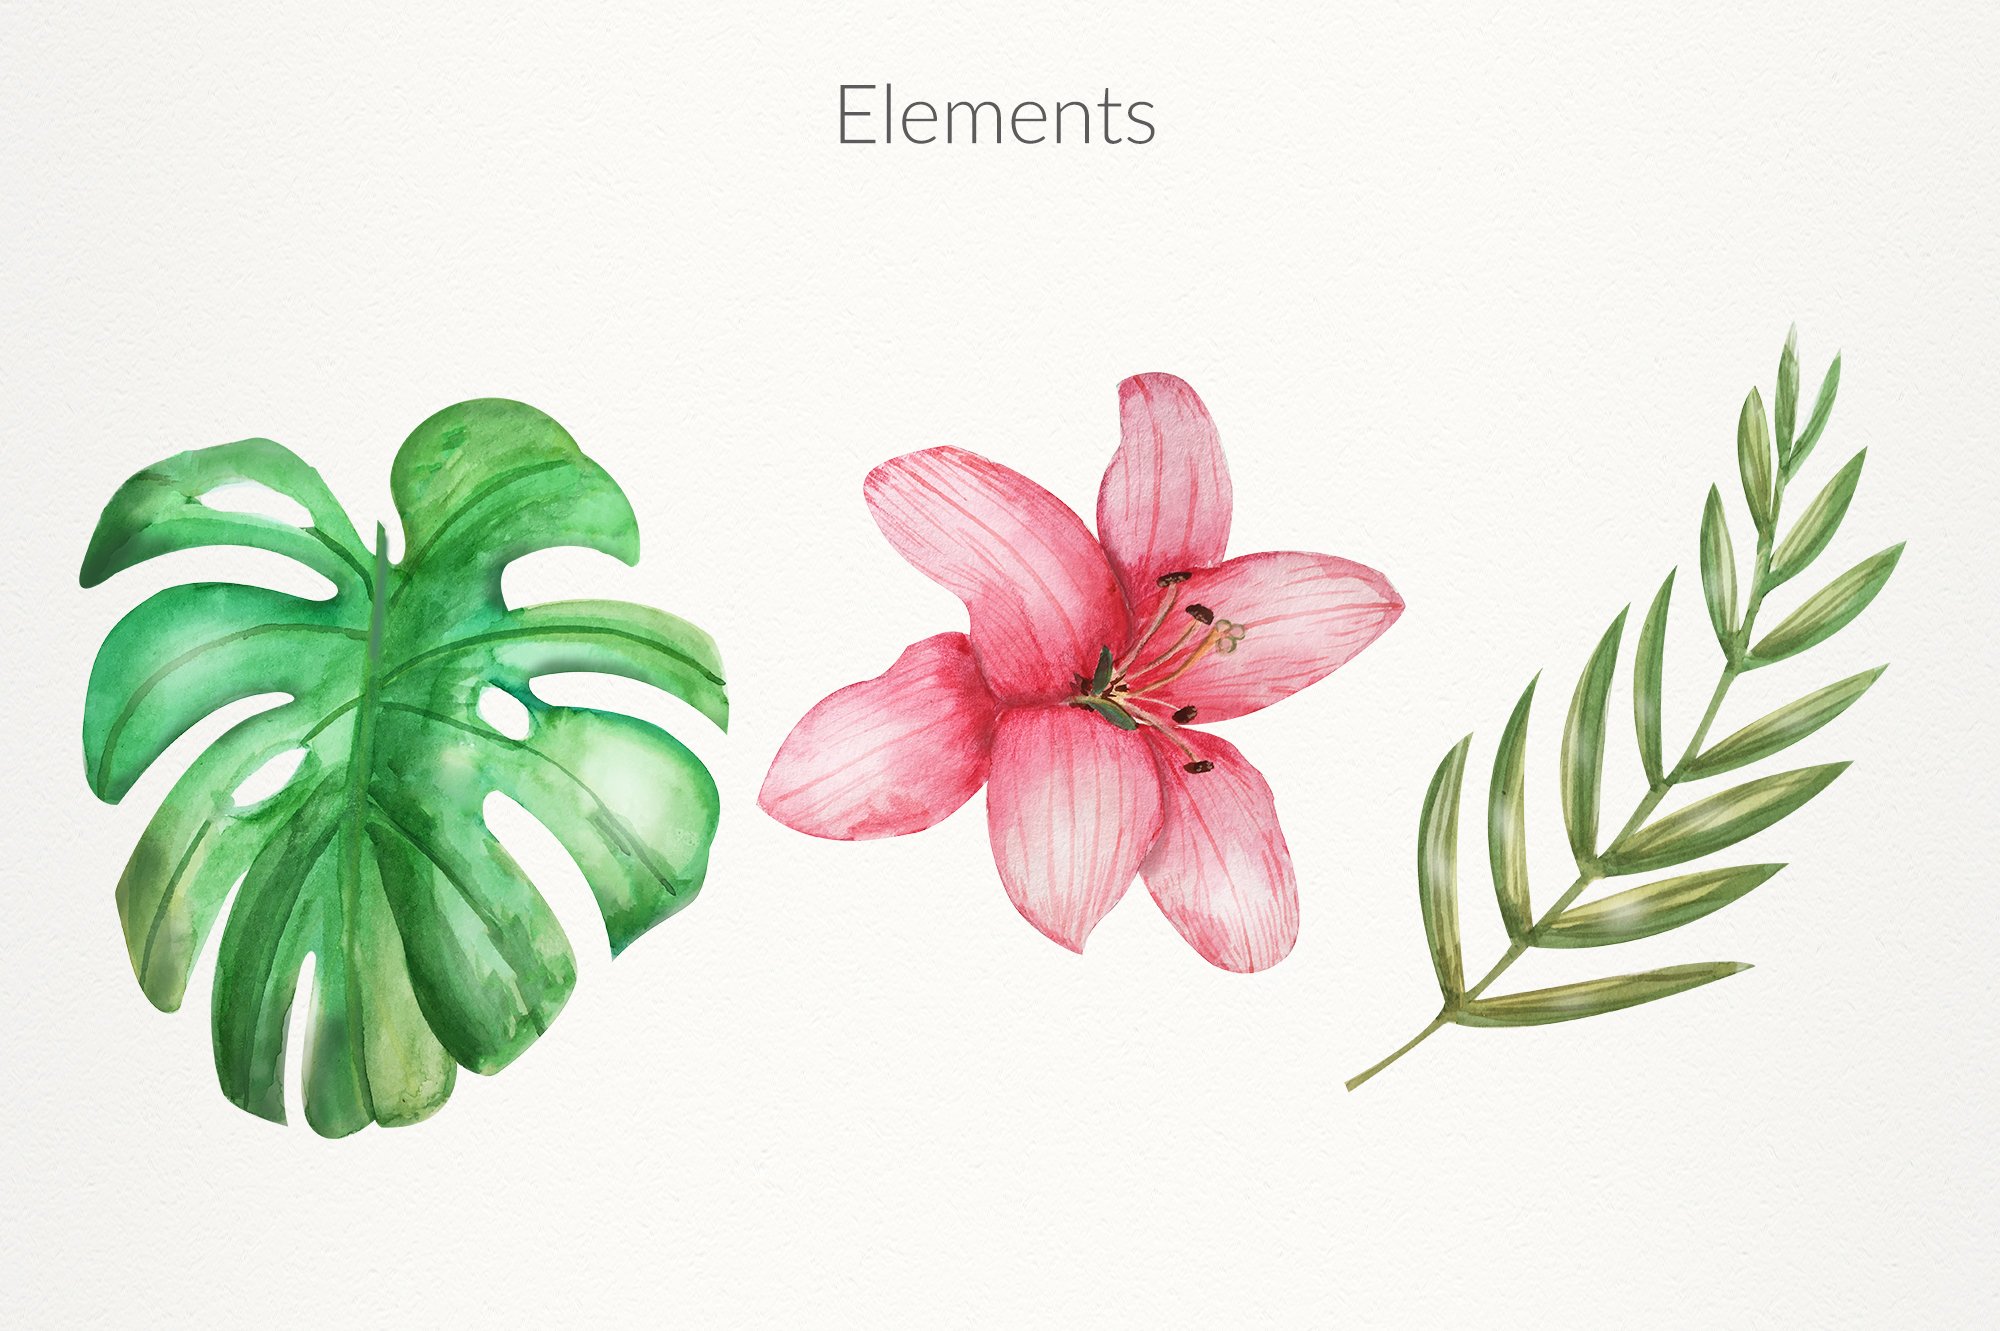 Some separate elements for full tropical composition.